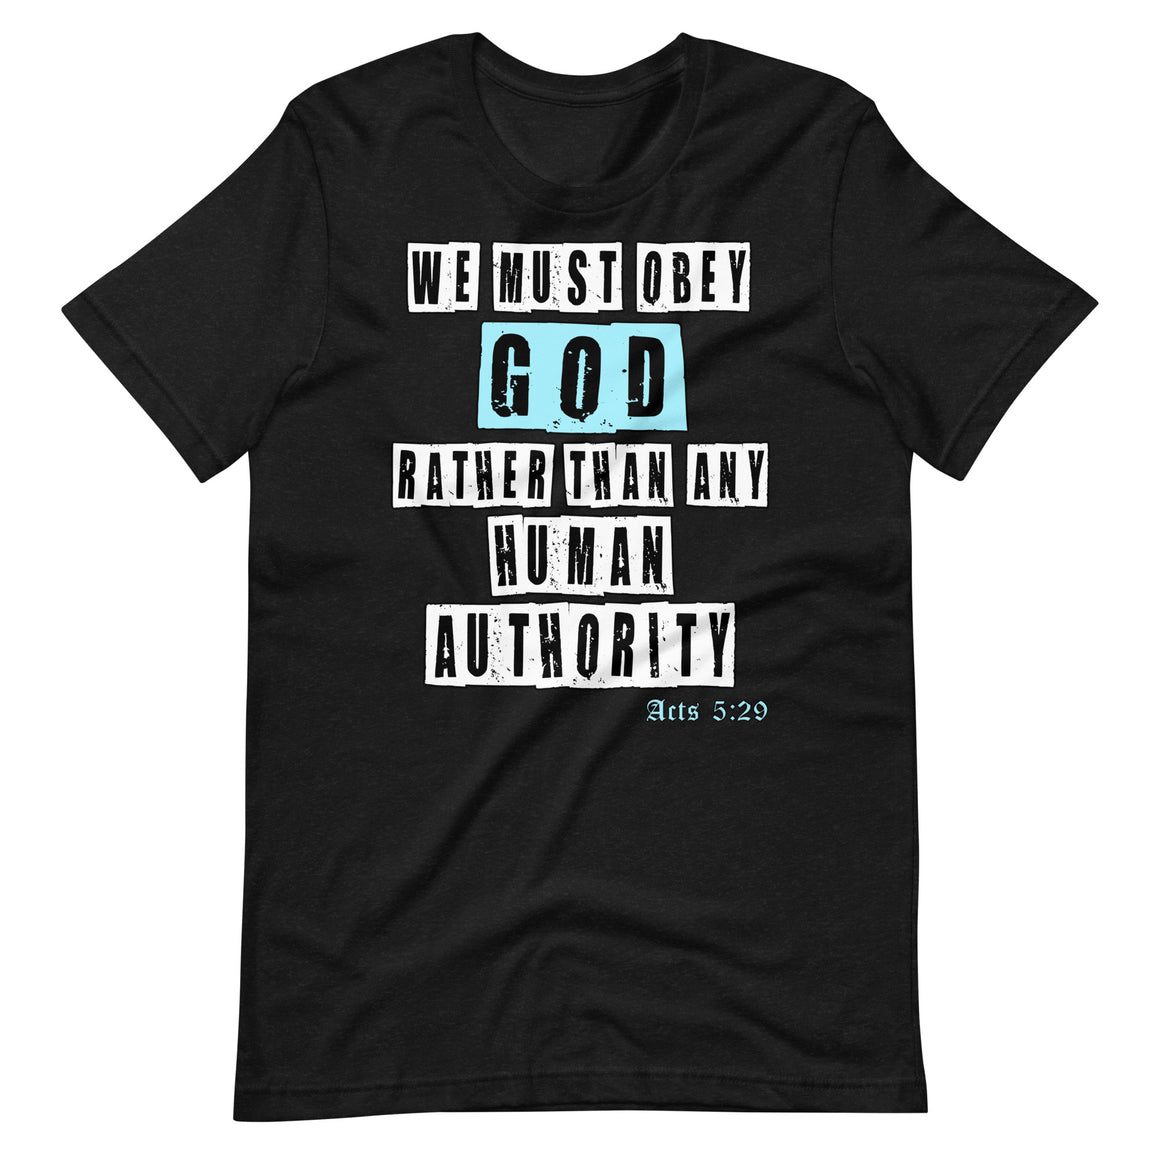 We Must Obey God Acts 5:29 Shirt by Libertarian Country